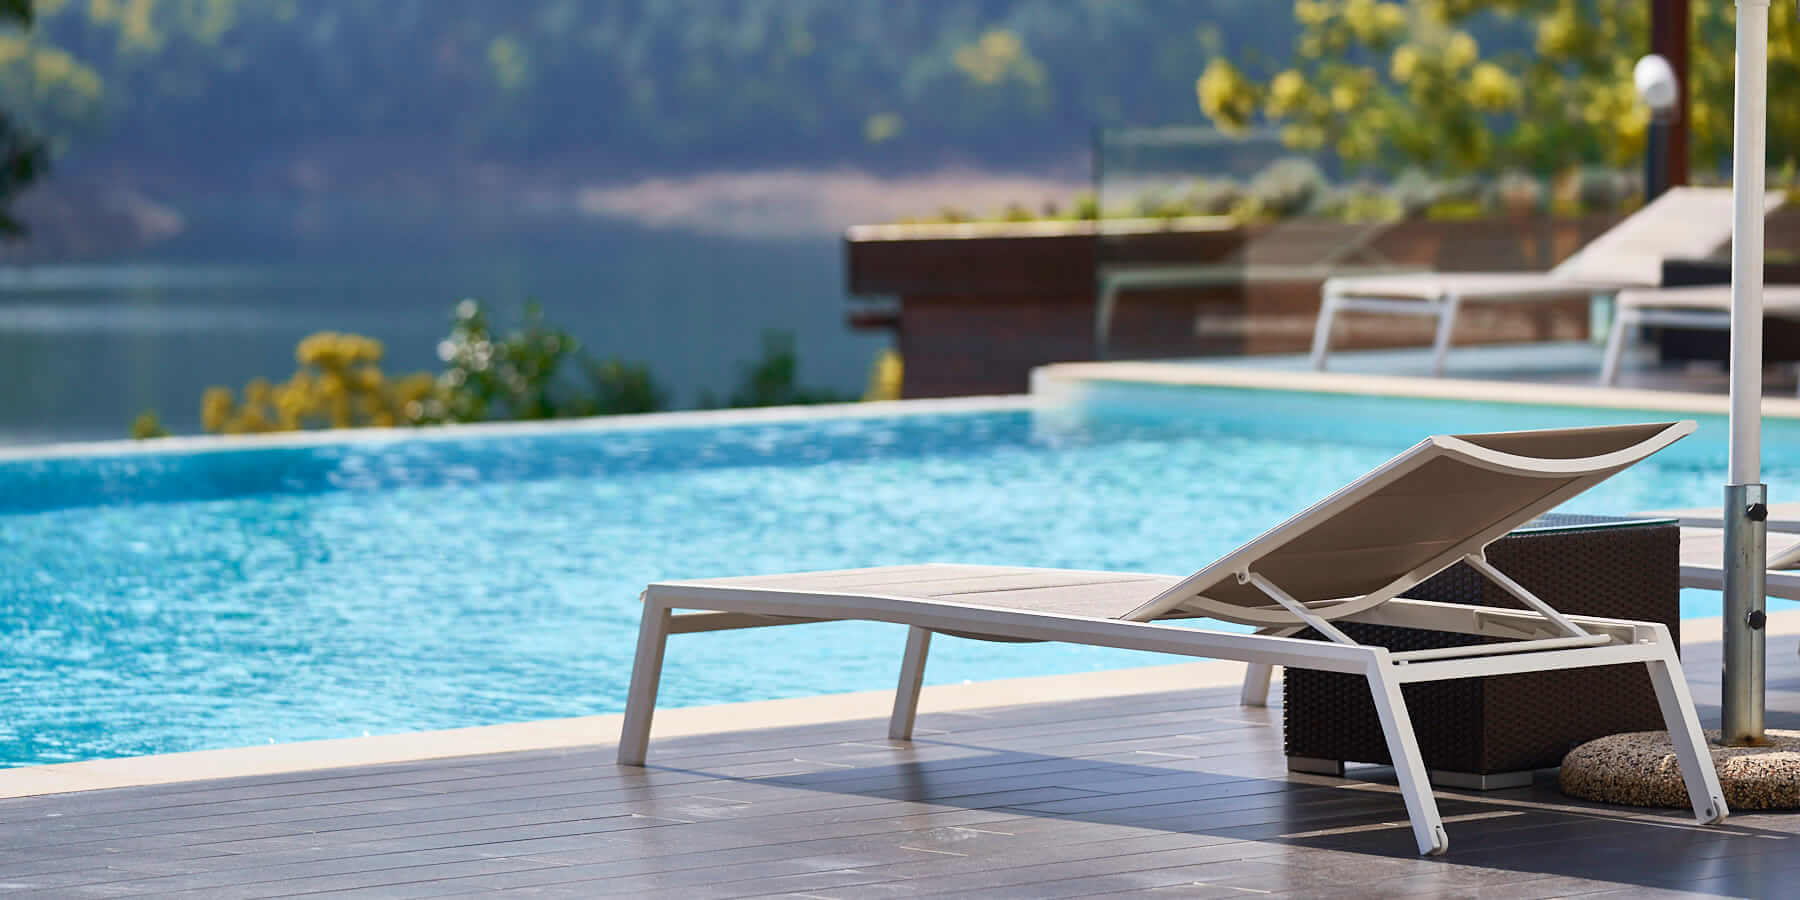 Sun lounger by the pool at juicy oasis